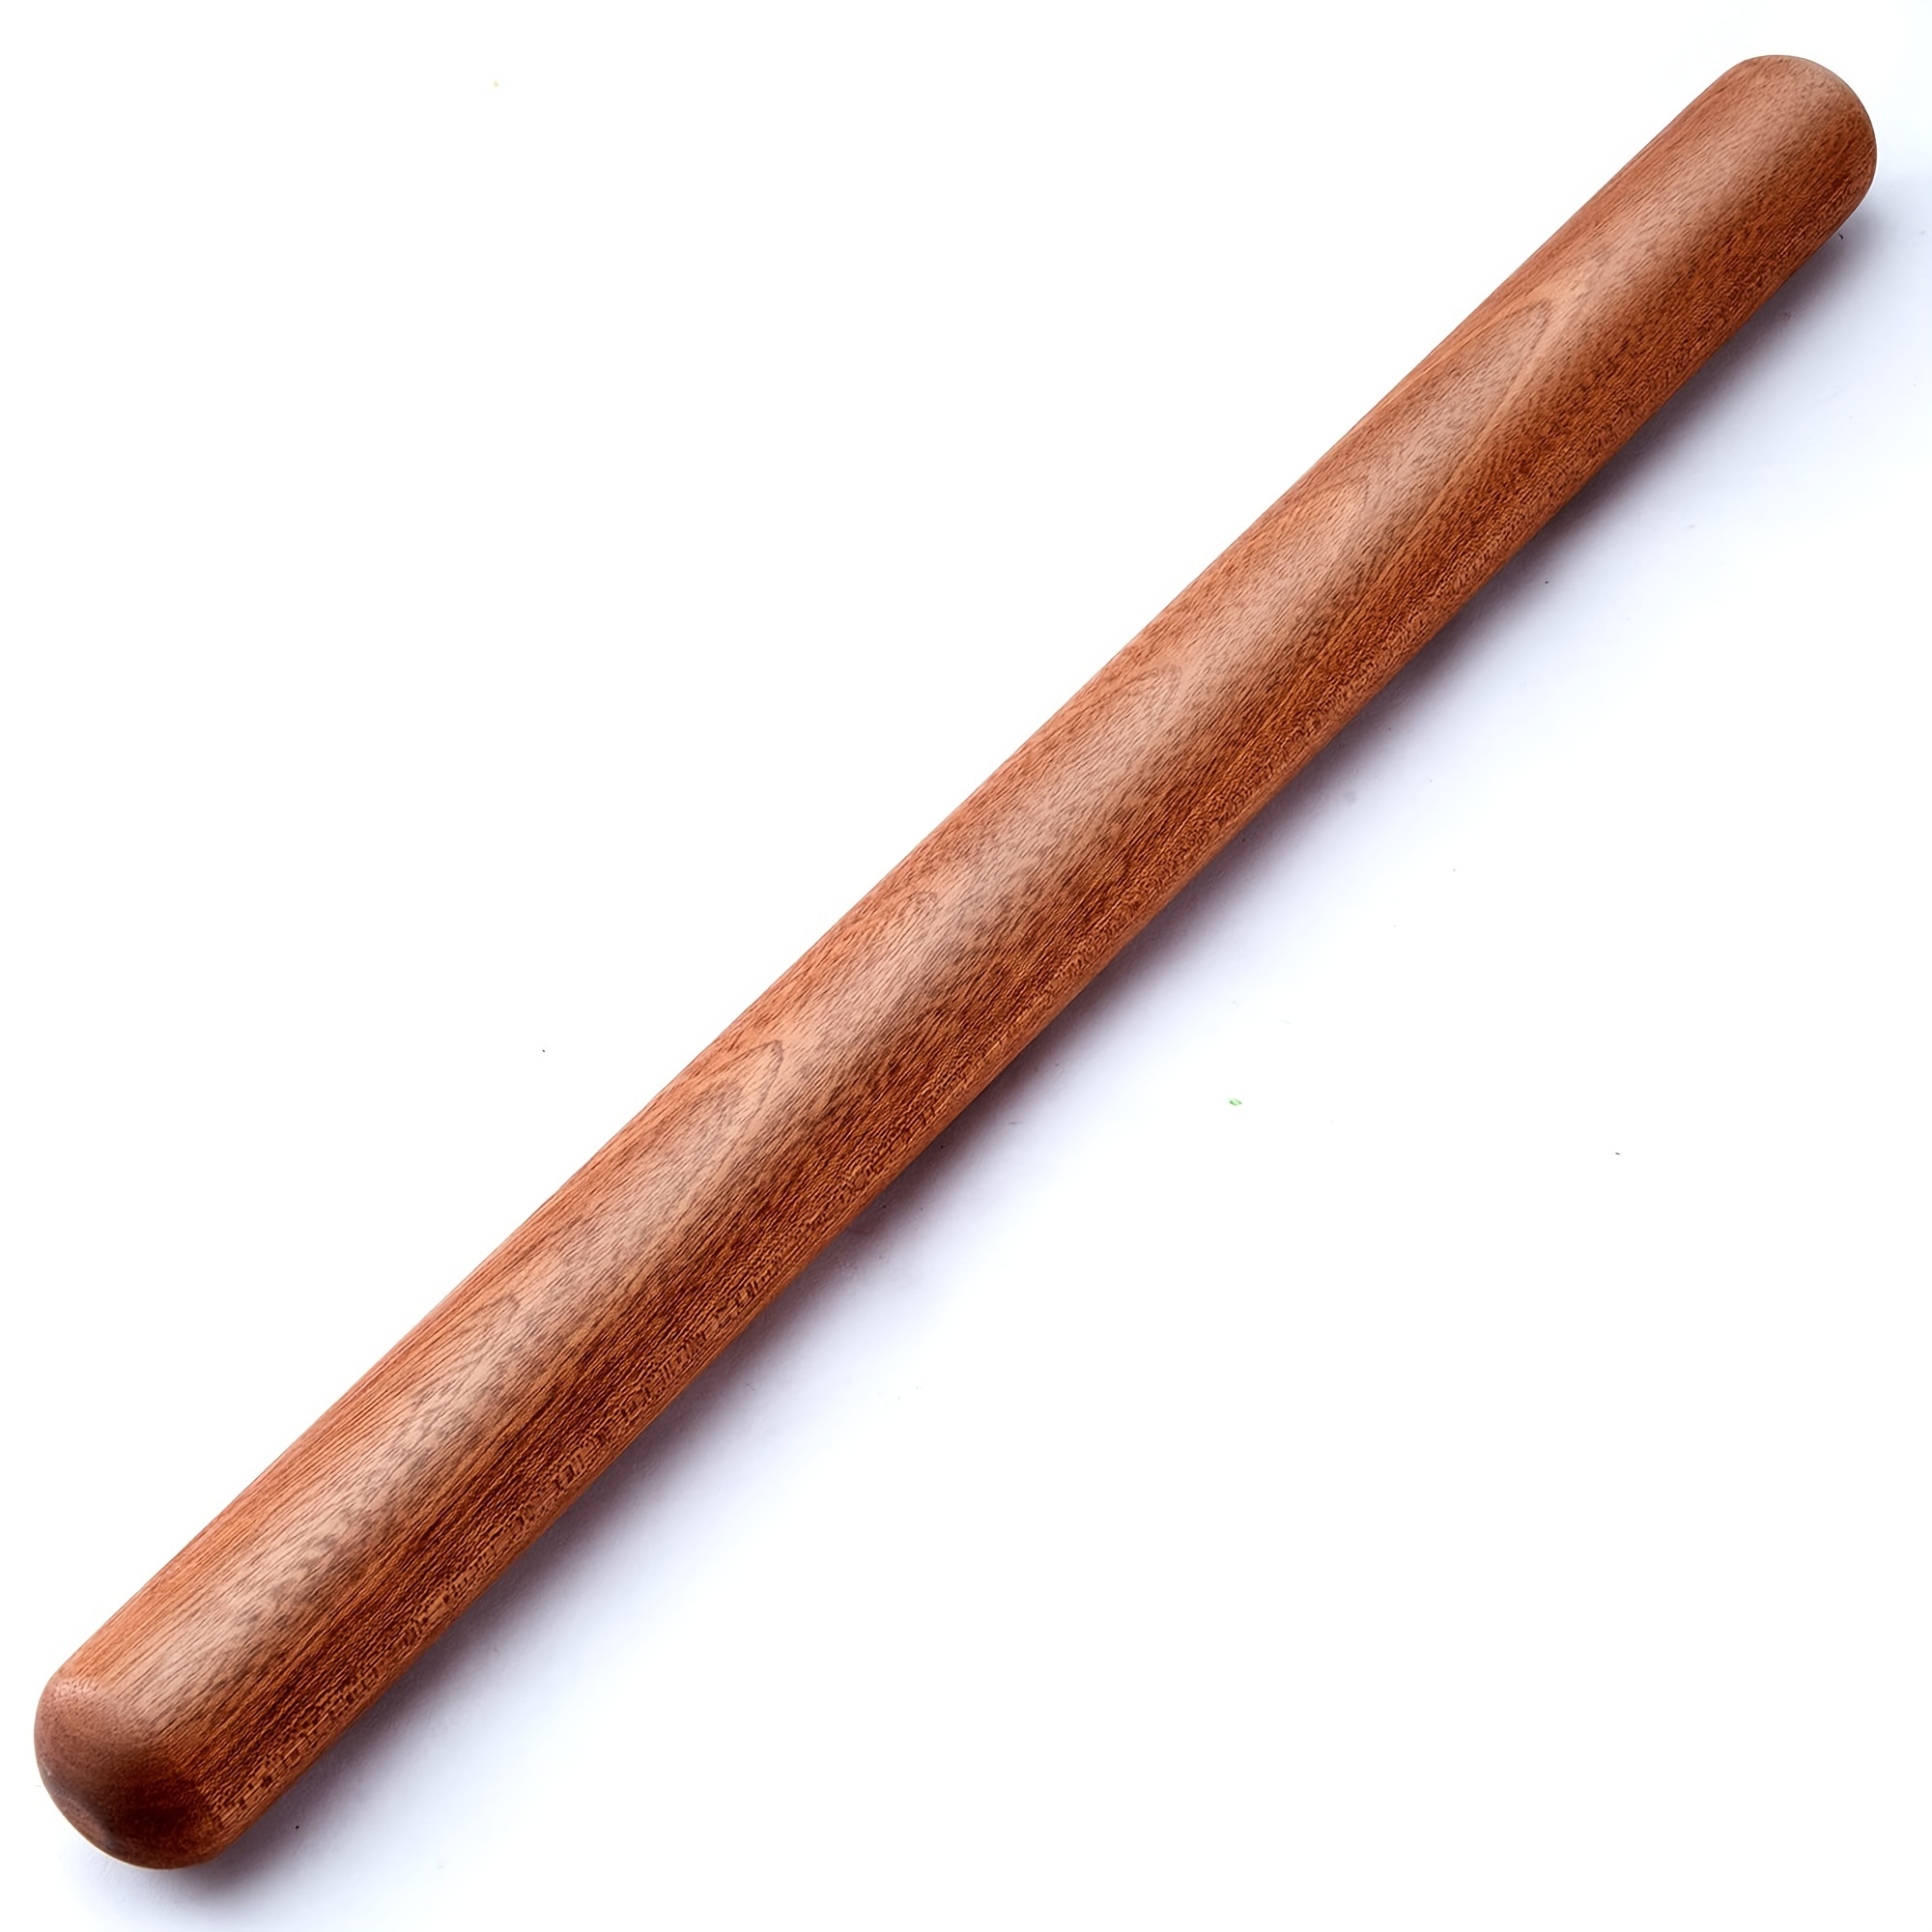 

1pc 20/30/40cm Wood Rolling Pin, Rolling Pin For Baking, Wooden Dough Roller With Round Design At Both Ends For Multipurpose